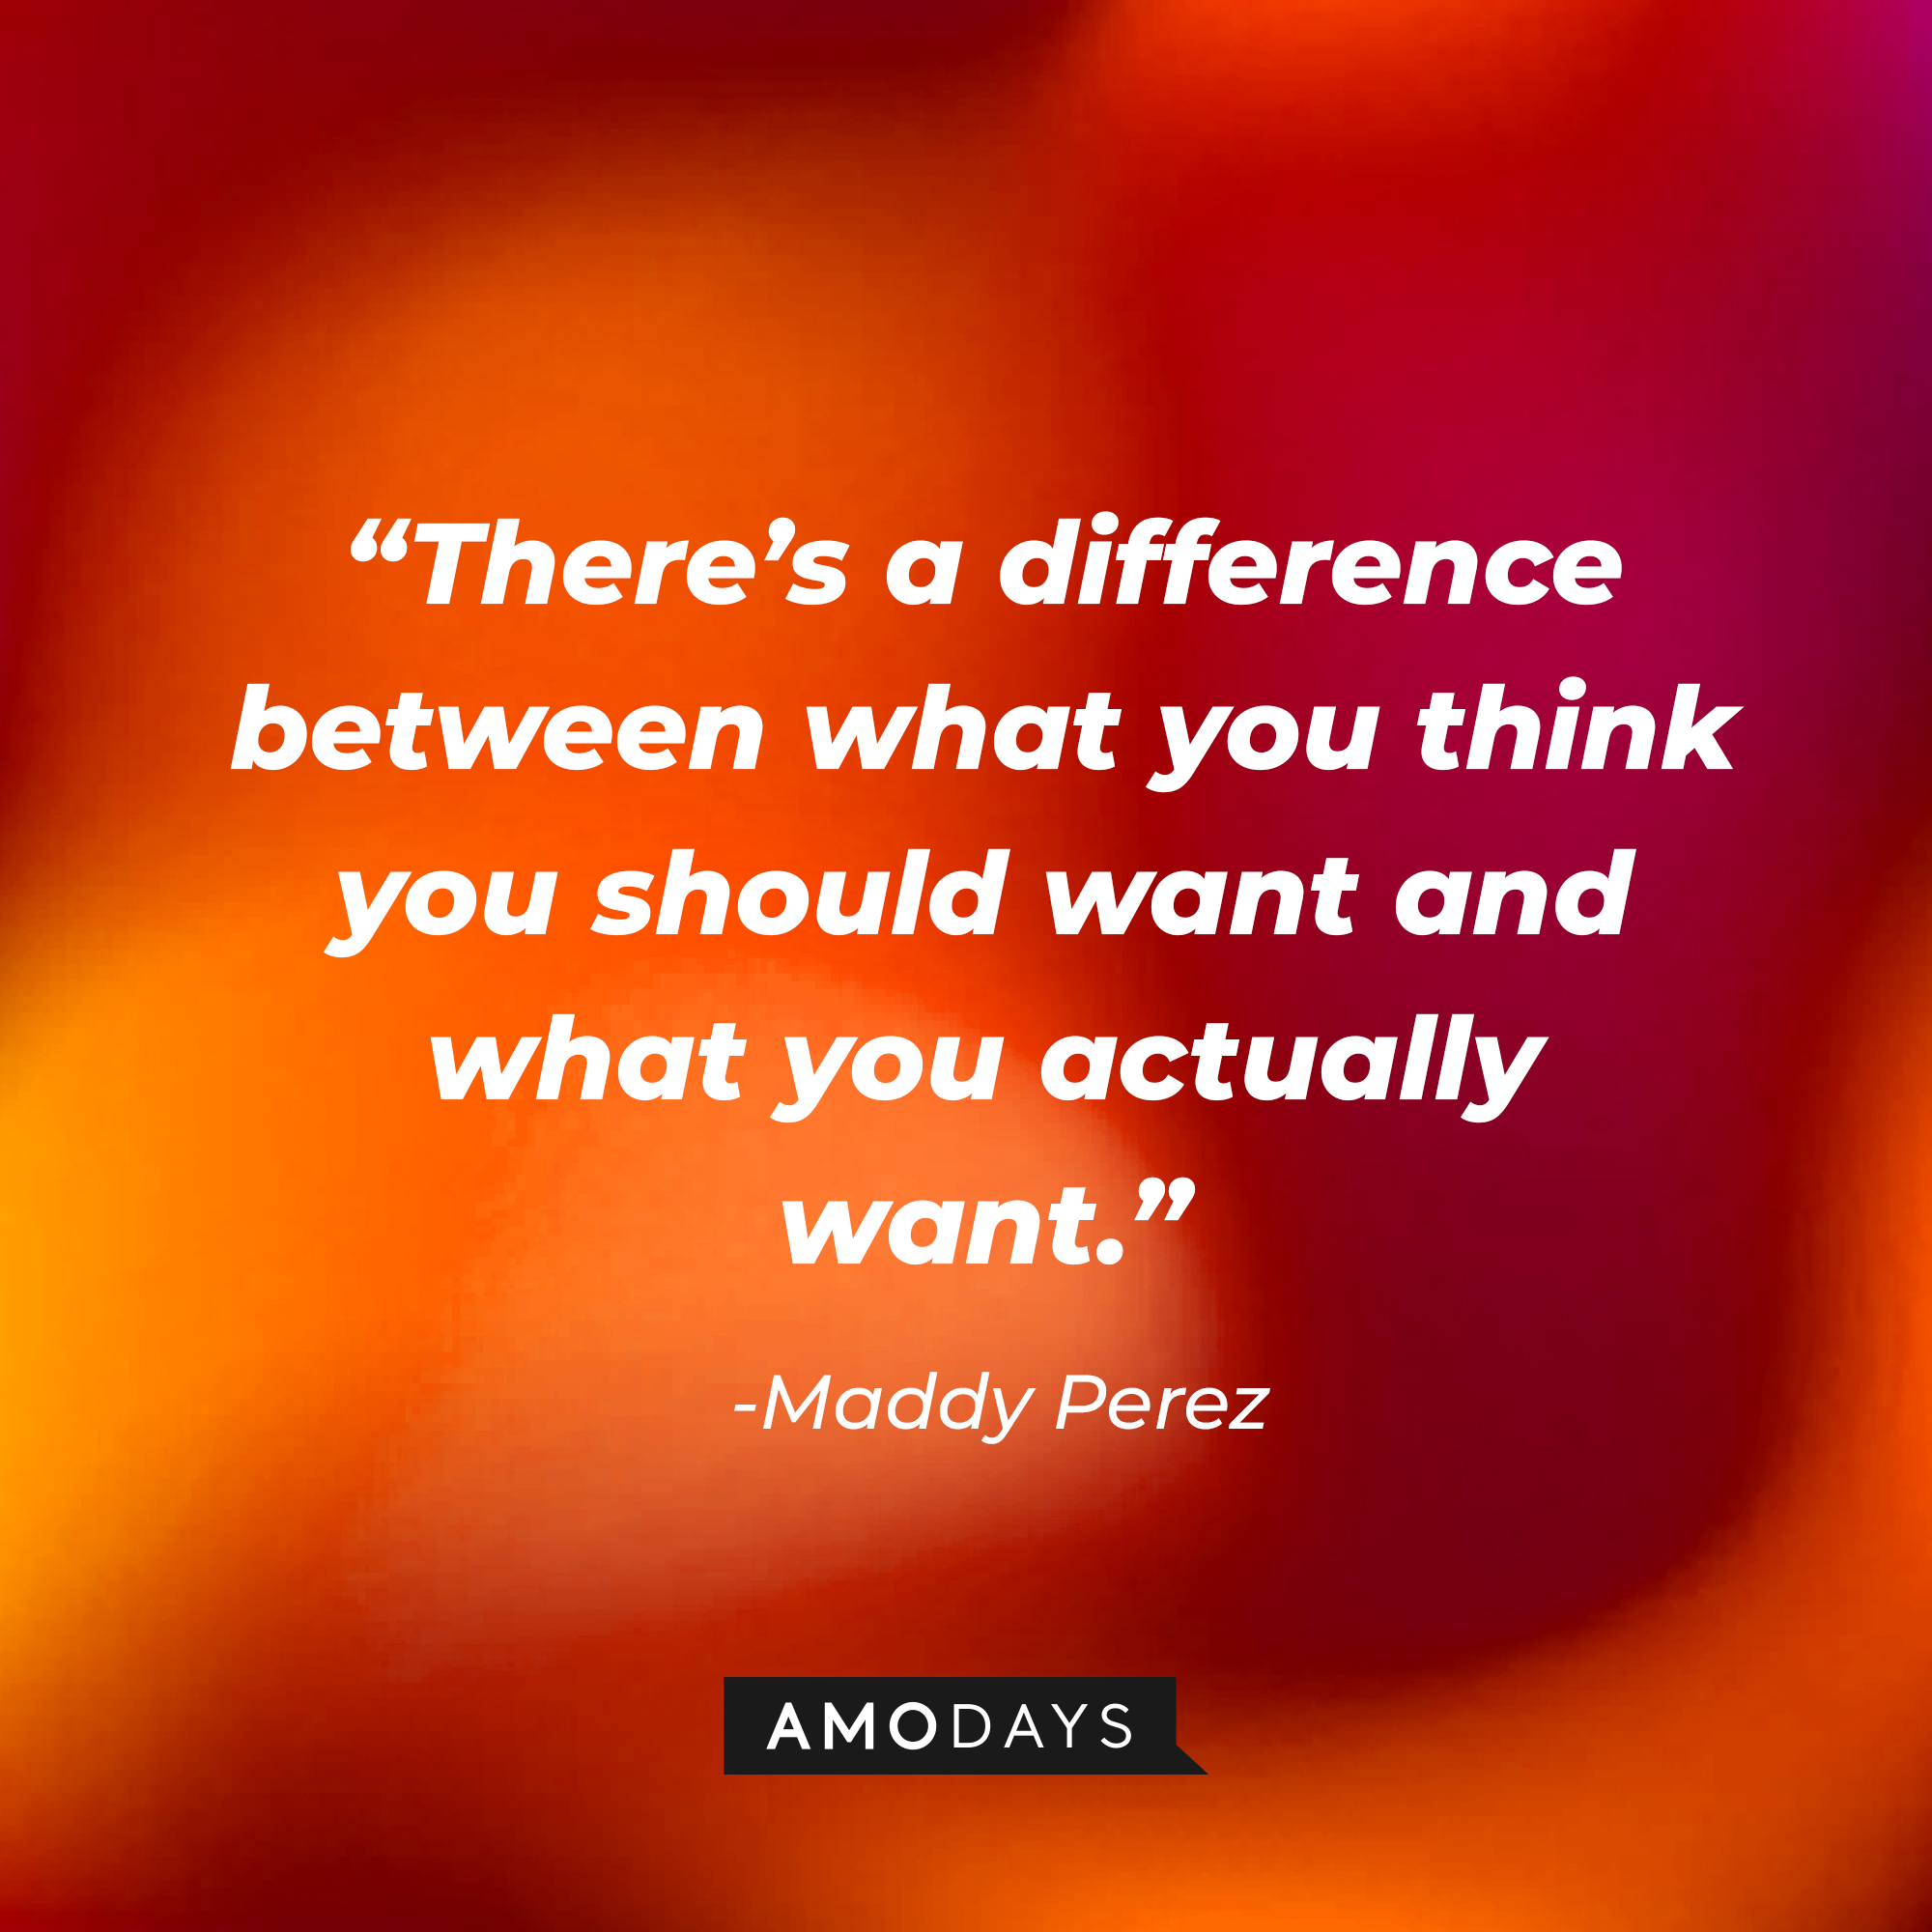 Maddy Perez’ quote: “There’s a difference between what you think you should want and what you actually want.” | Source: AmoDays